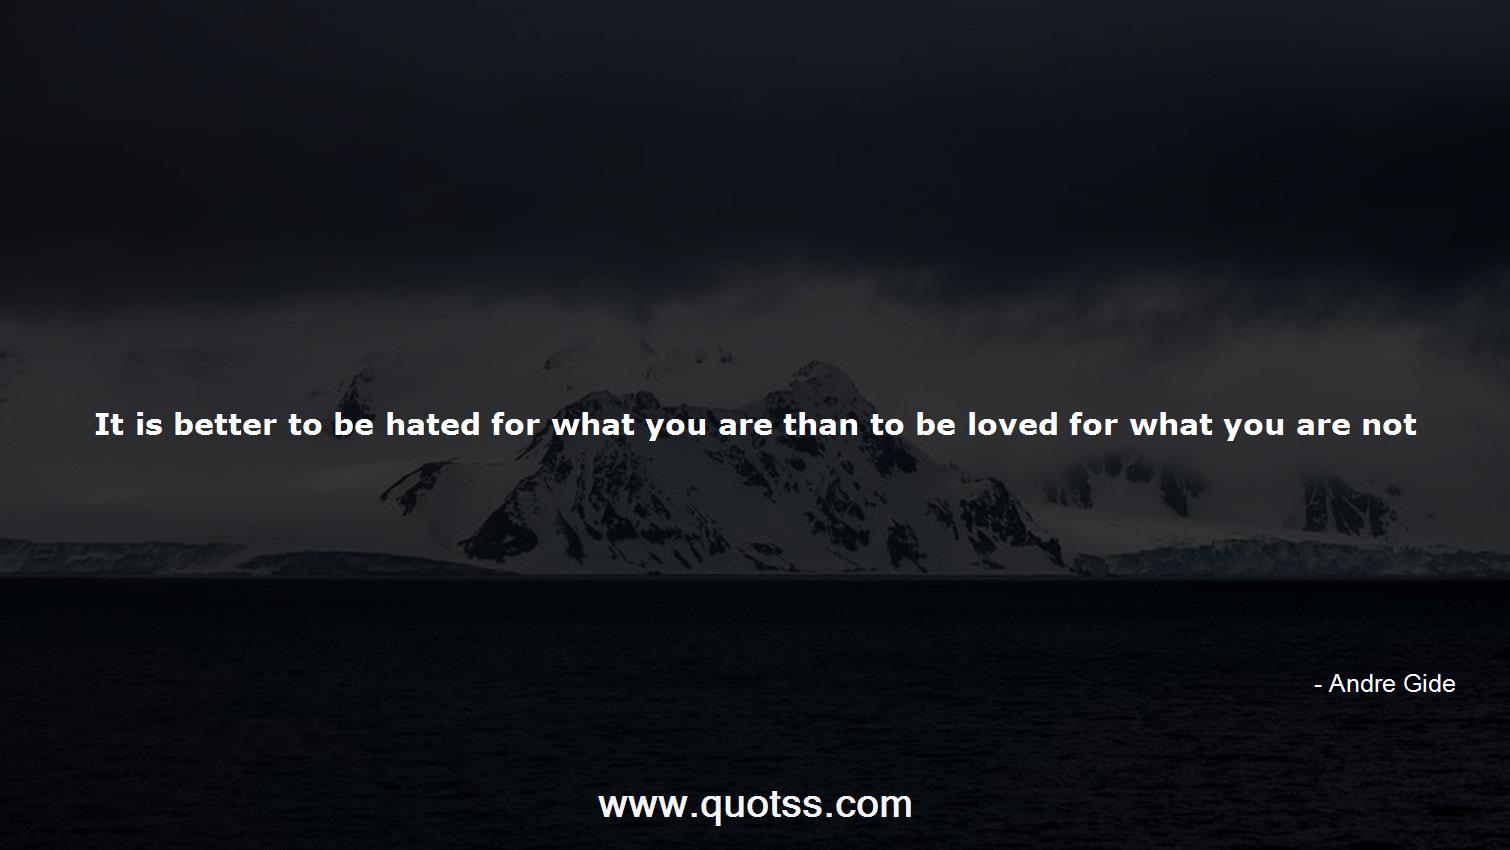 Andre Gide Quote on Quotss